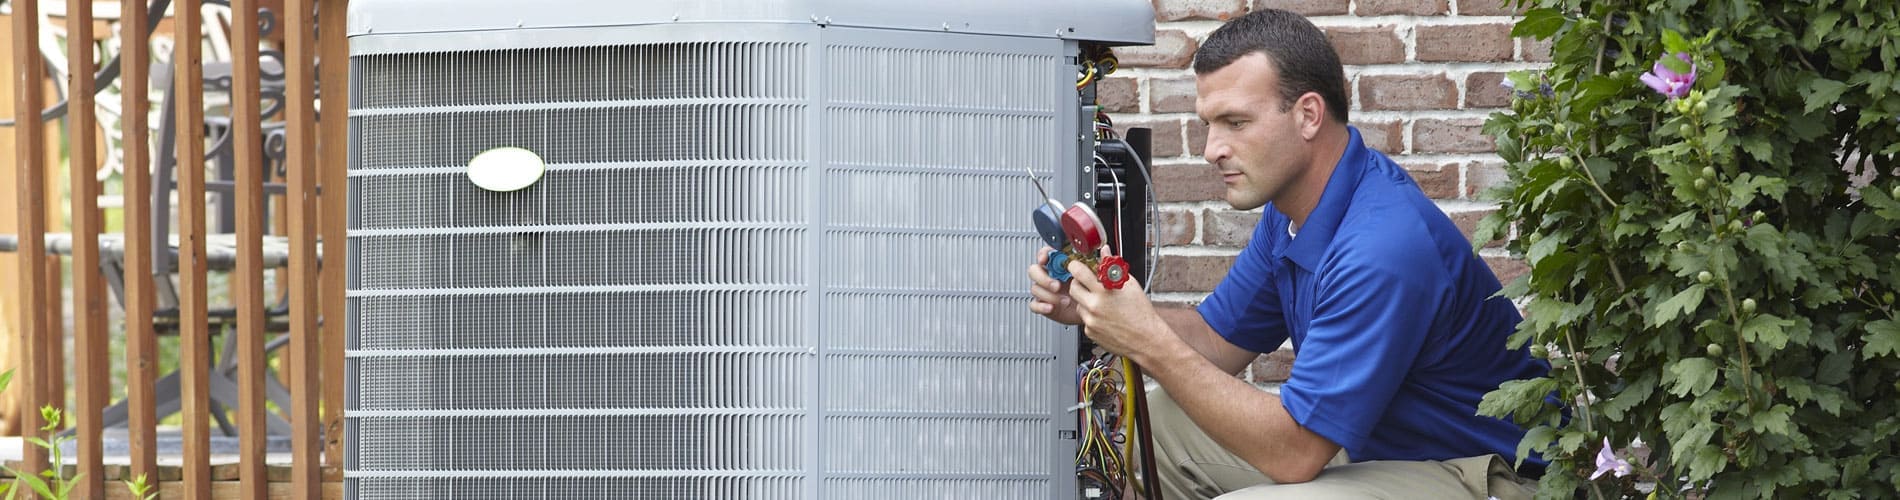 Air Conditioning And Heating Miami, FL - Emergency Home AC Installation And Heating System Repair